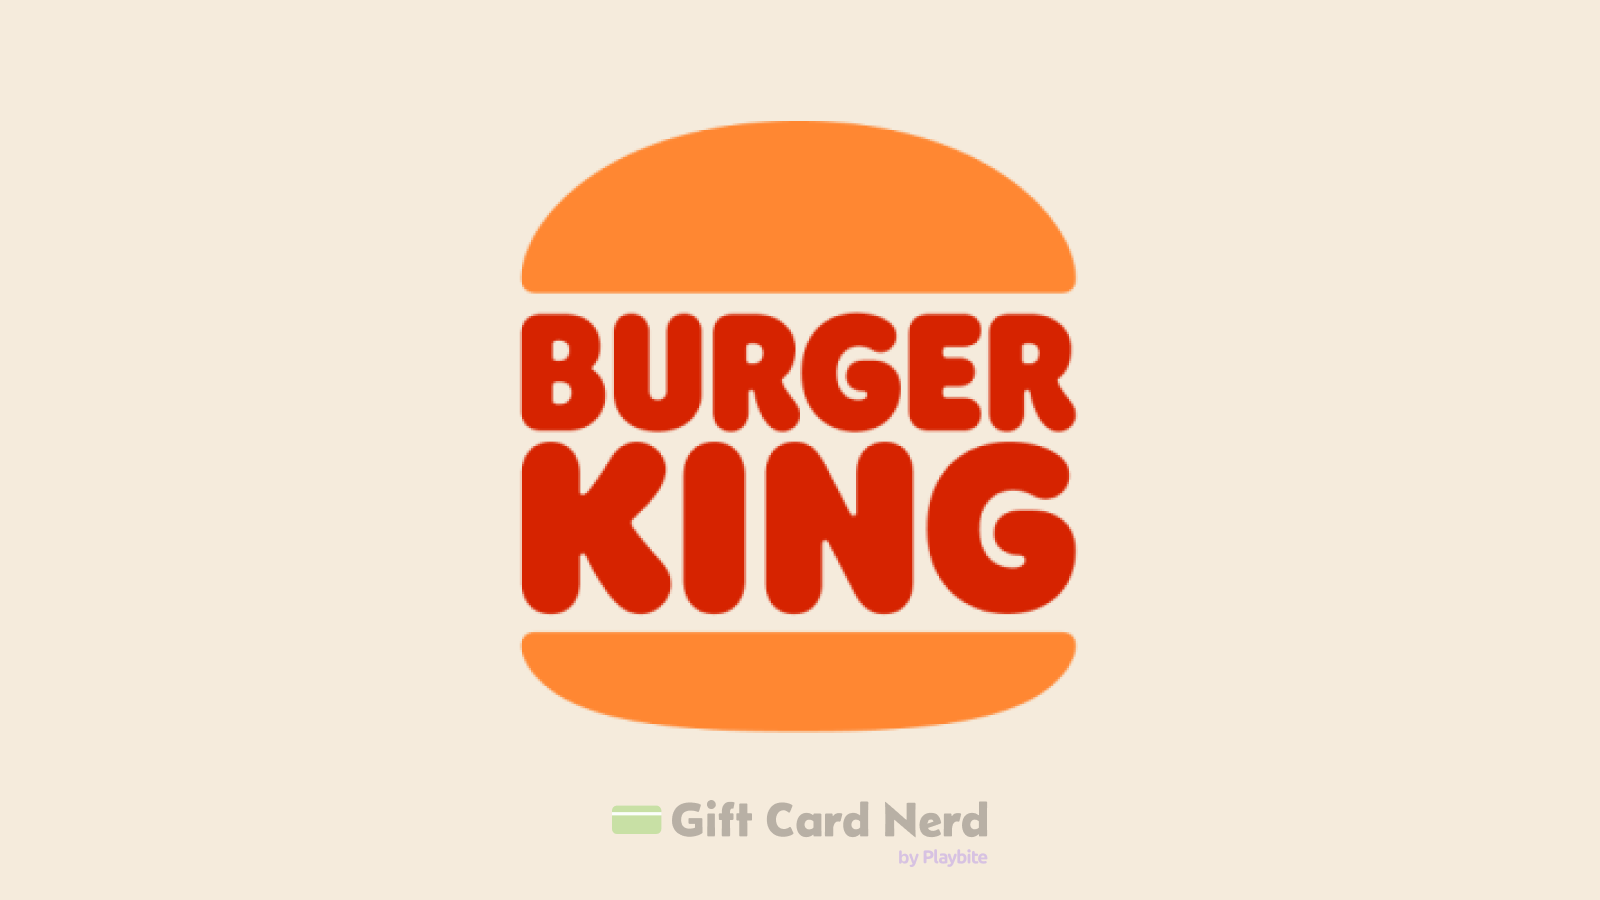 Can I Use a Burger King Gift Card on Steam?